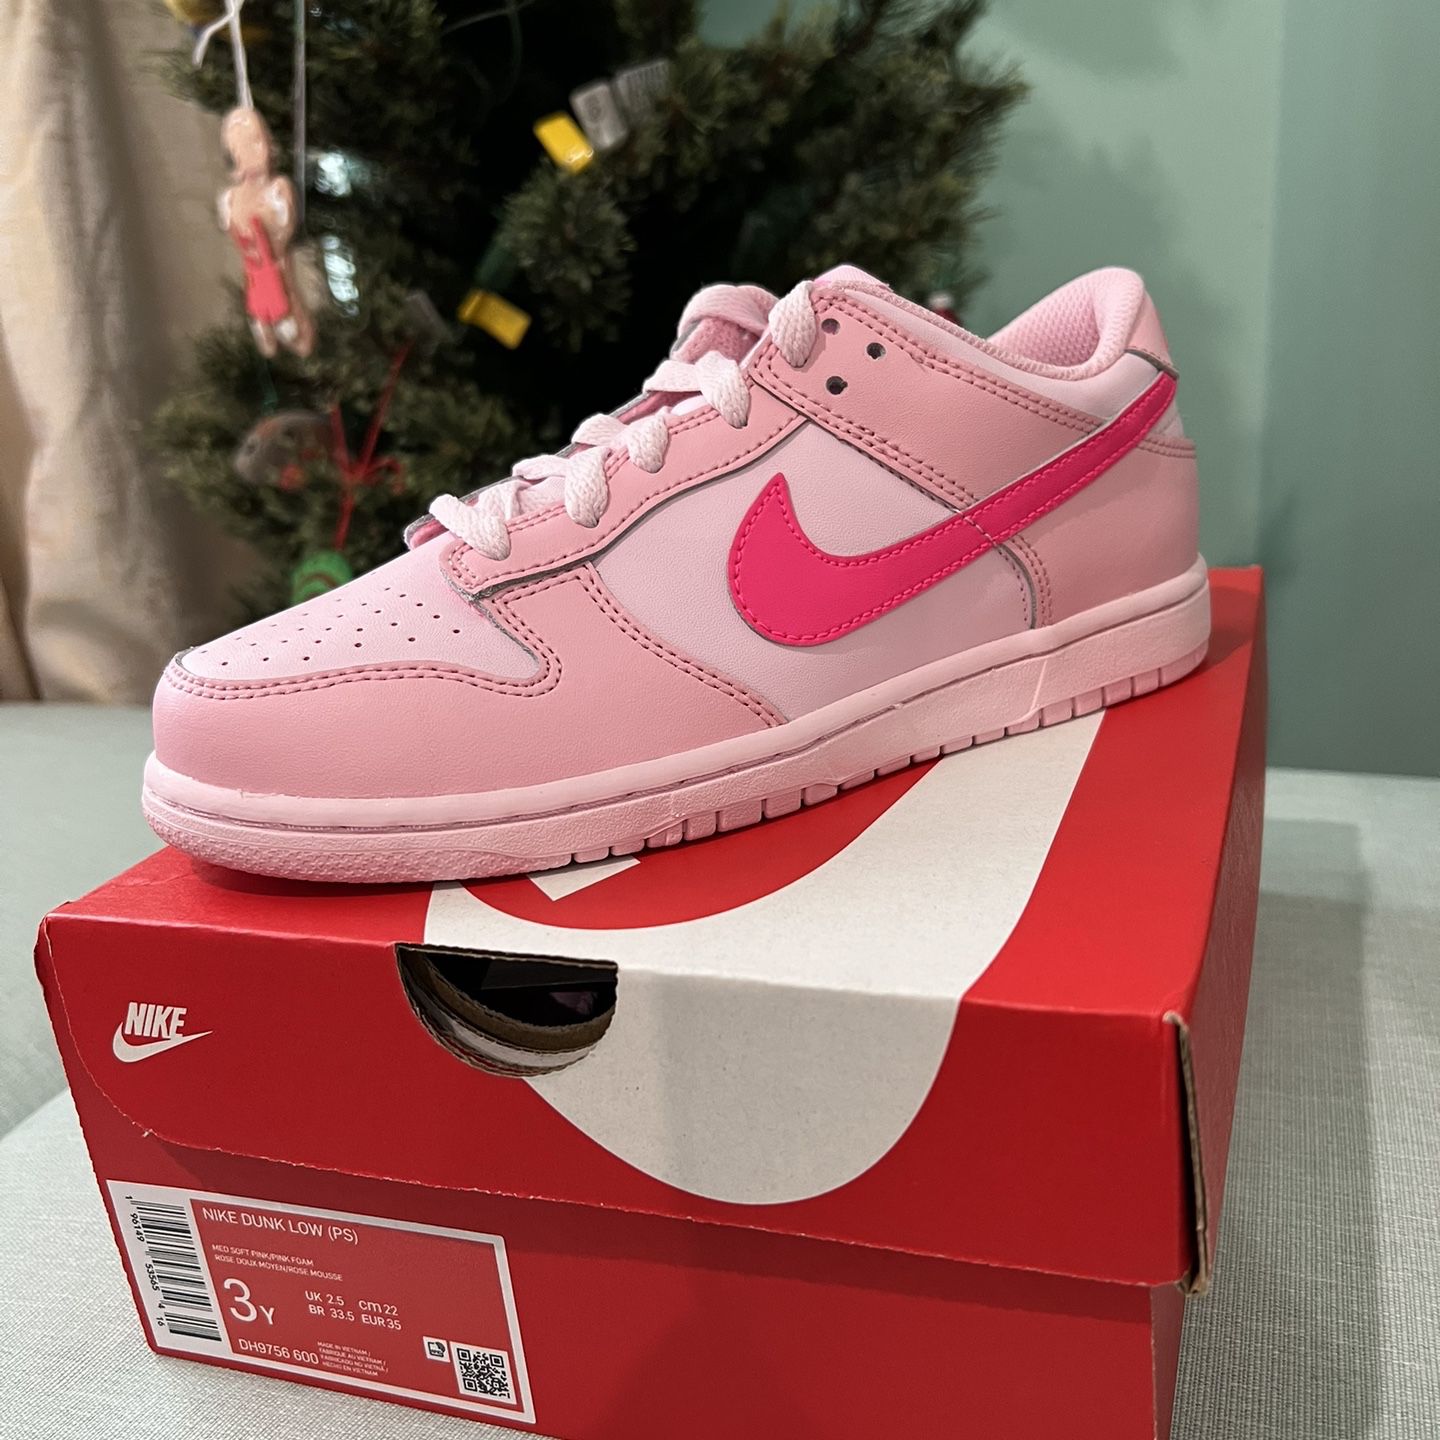 Vandy The Pink “Burger Dunks” Sz 13 for Sale in Providence, RI - OfferUp